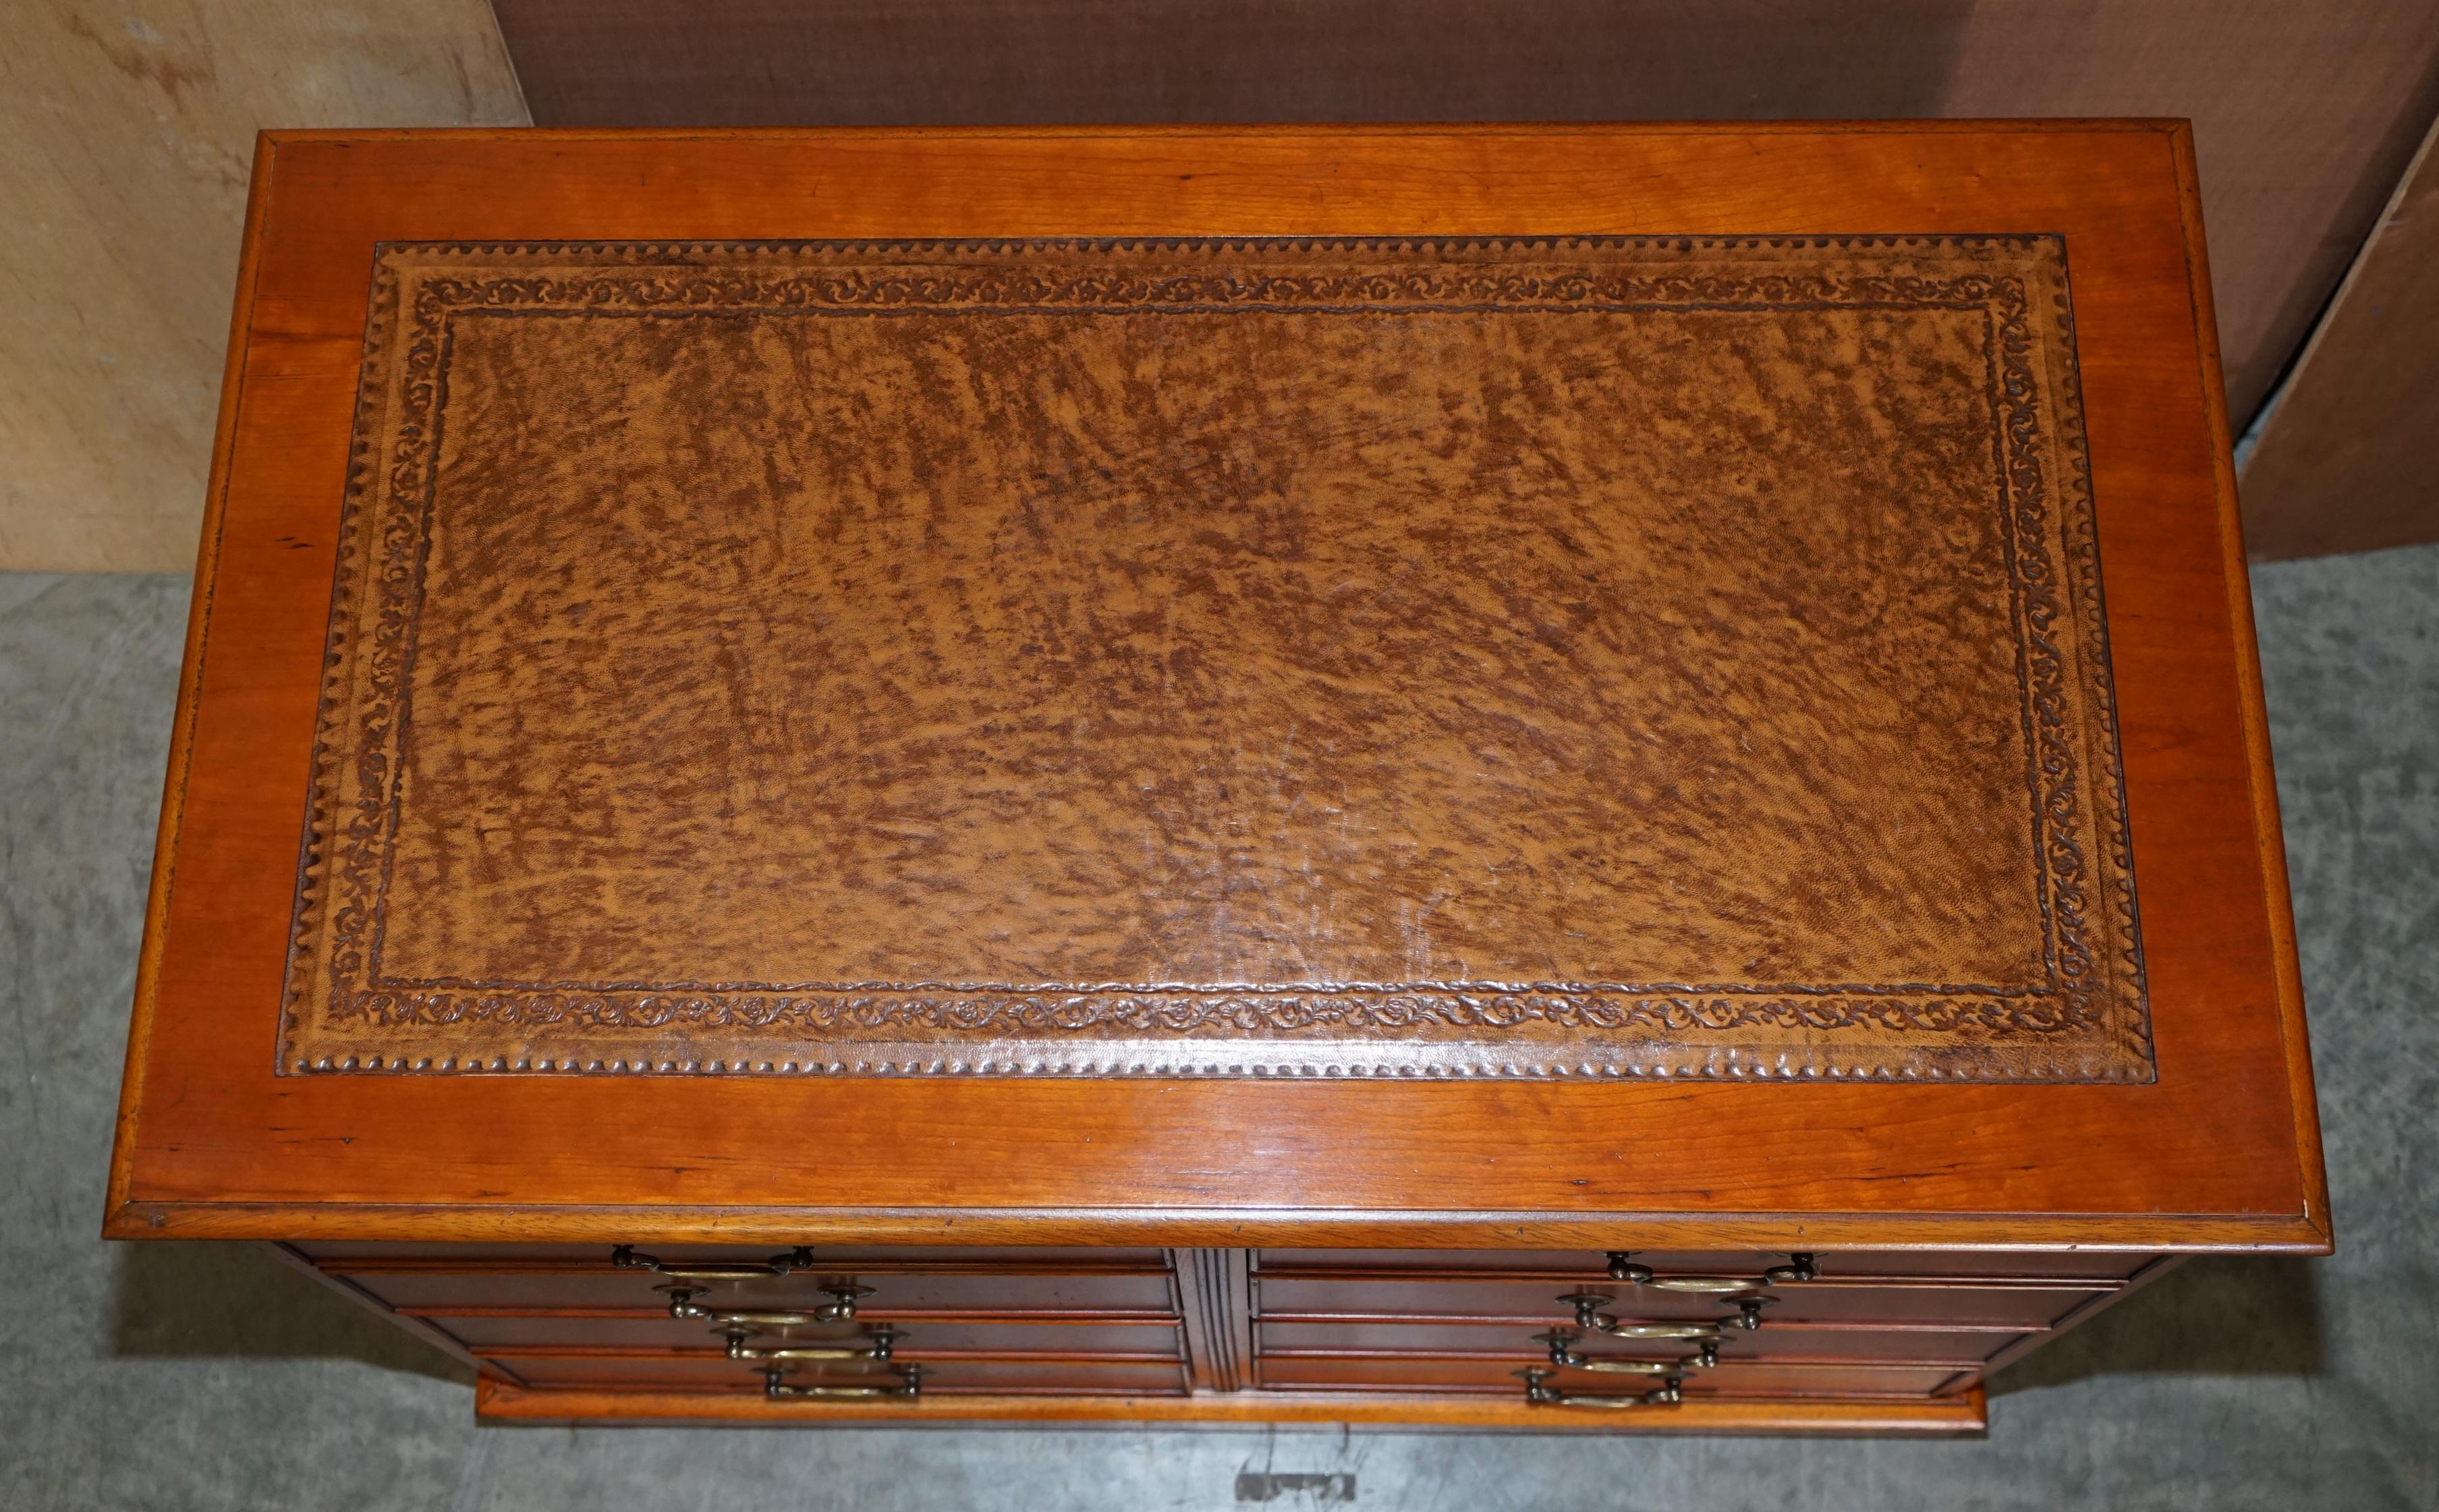 Stunning Yew Wood Brown Leather Double Filing Cabinet for at Home Office Study 1